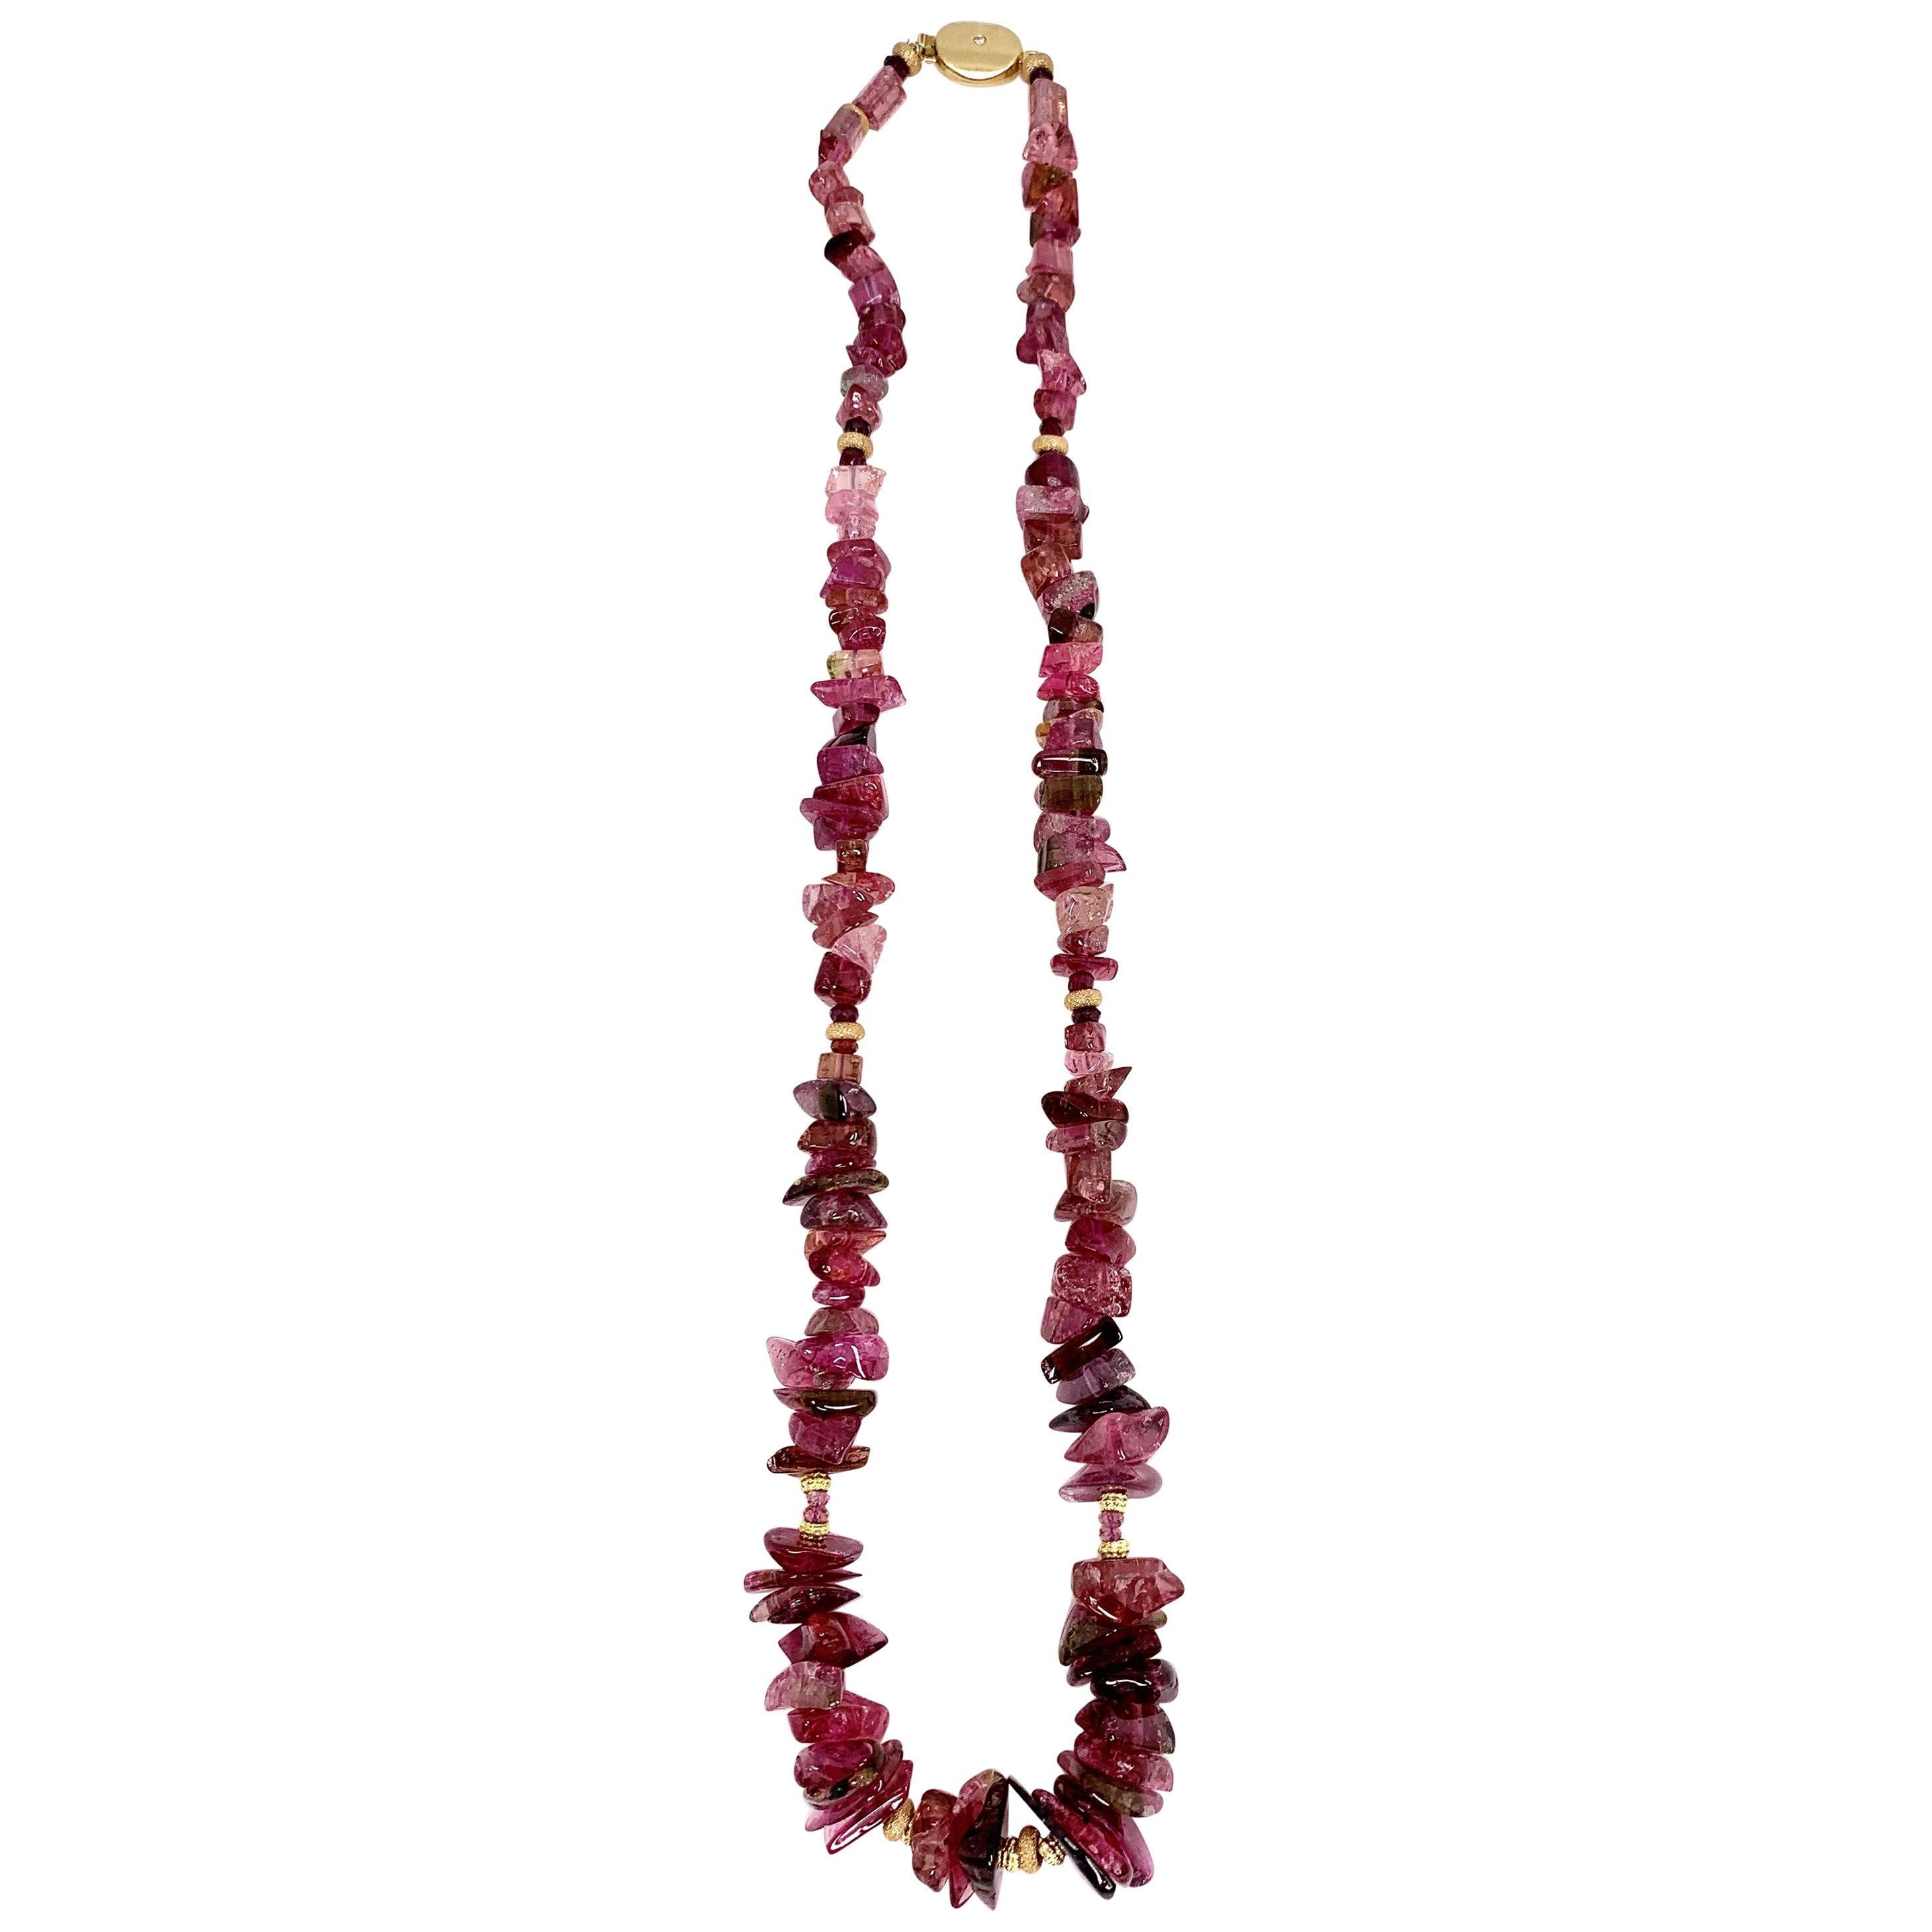 Rough but refined, and bursting with color! This unique necklace features striking shades of raspberry pink tourmalines that weigh over 254 carats total! The gorgeous nugget style beads, each unique in itself, are counterbalanced by shiny 14k and